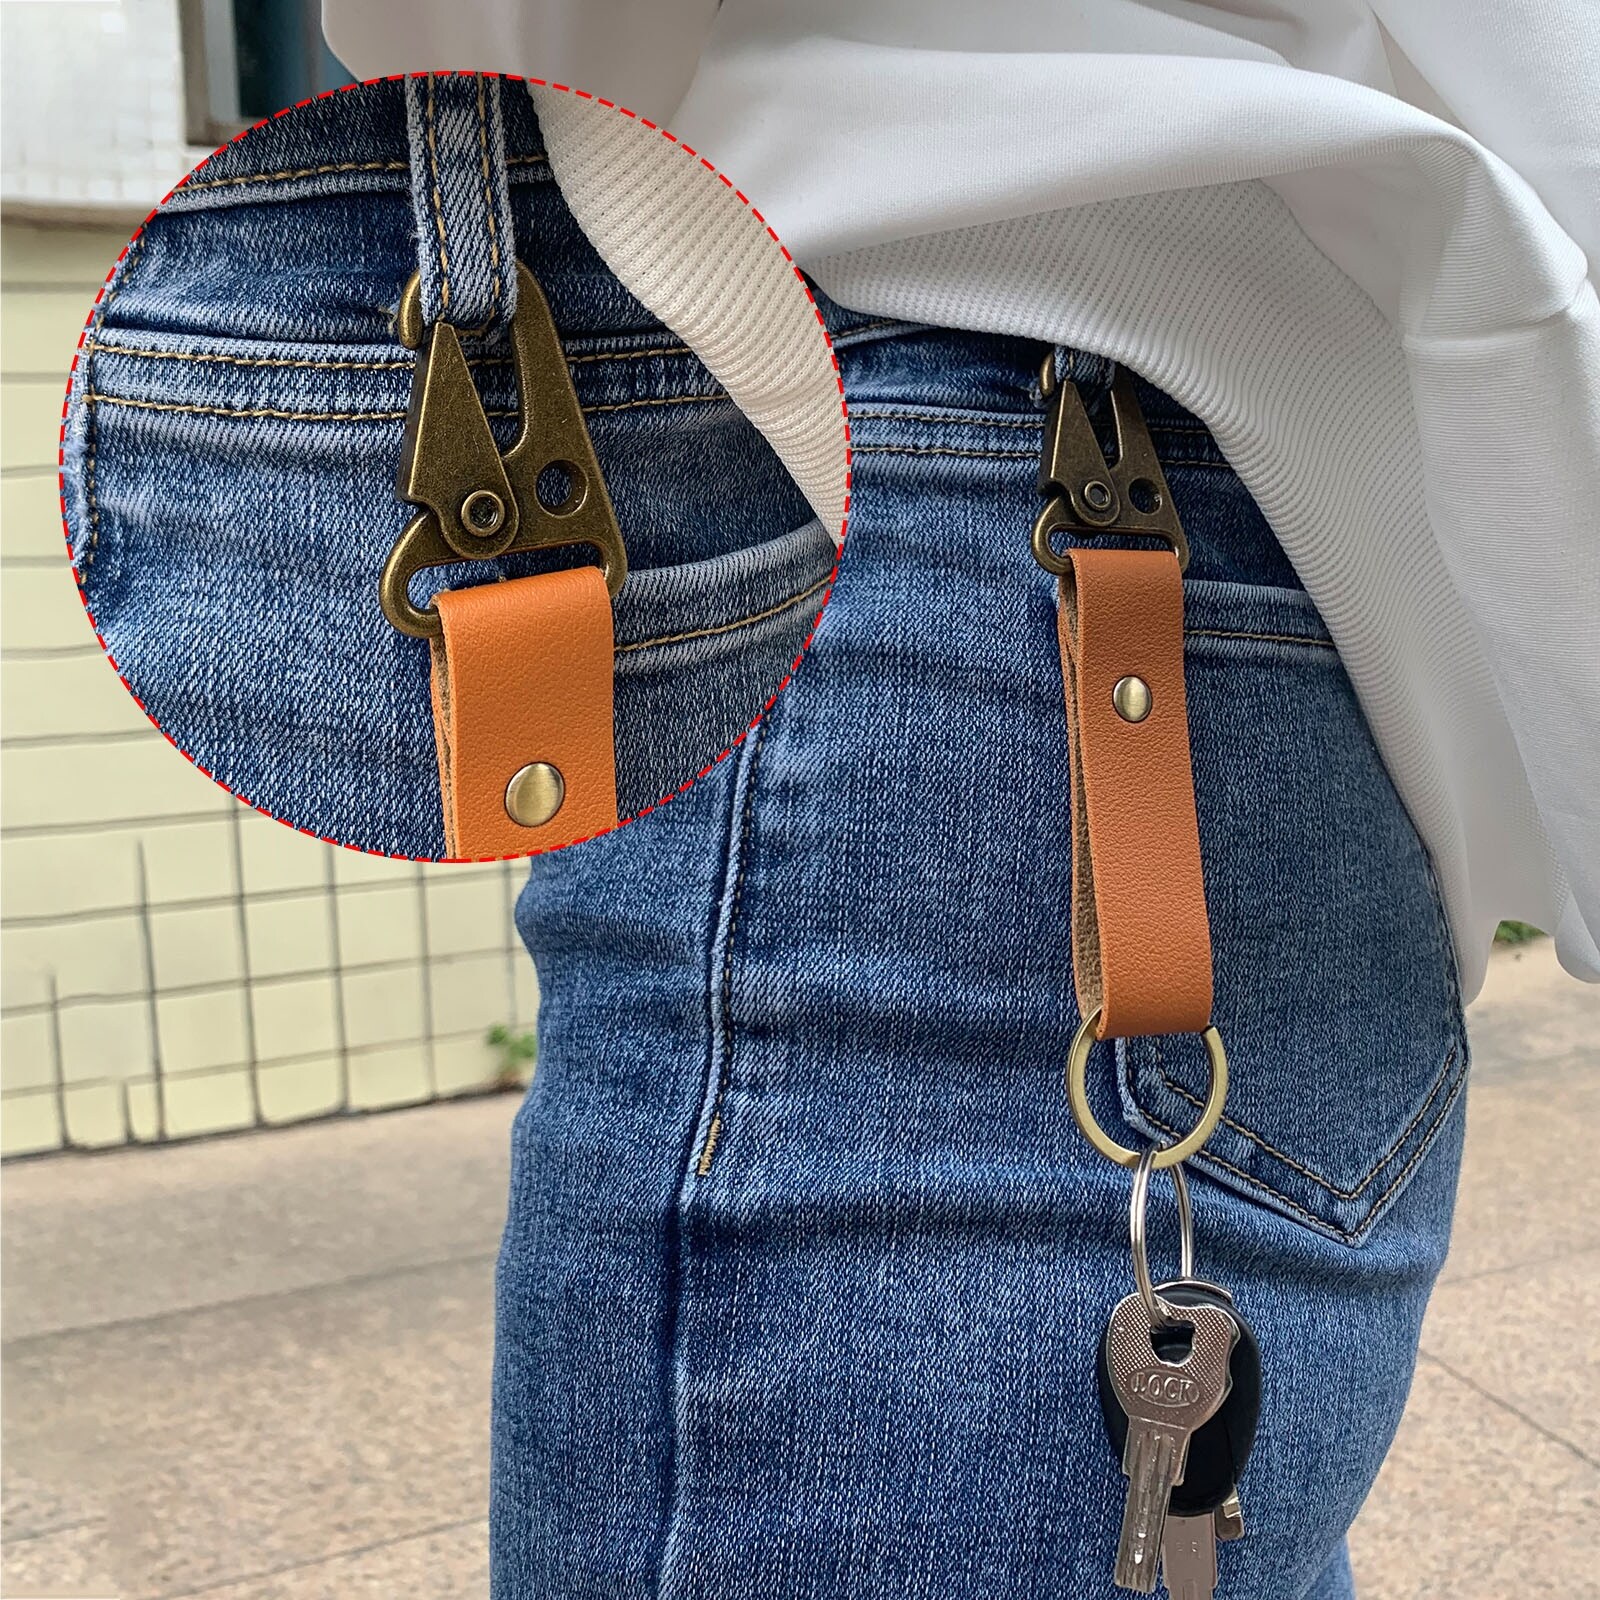 Leather Keychain Belt Clip